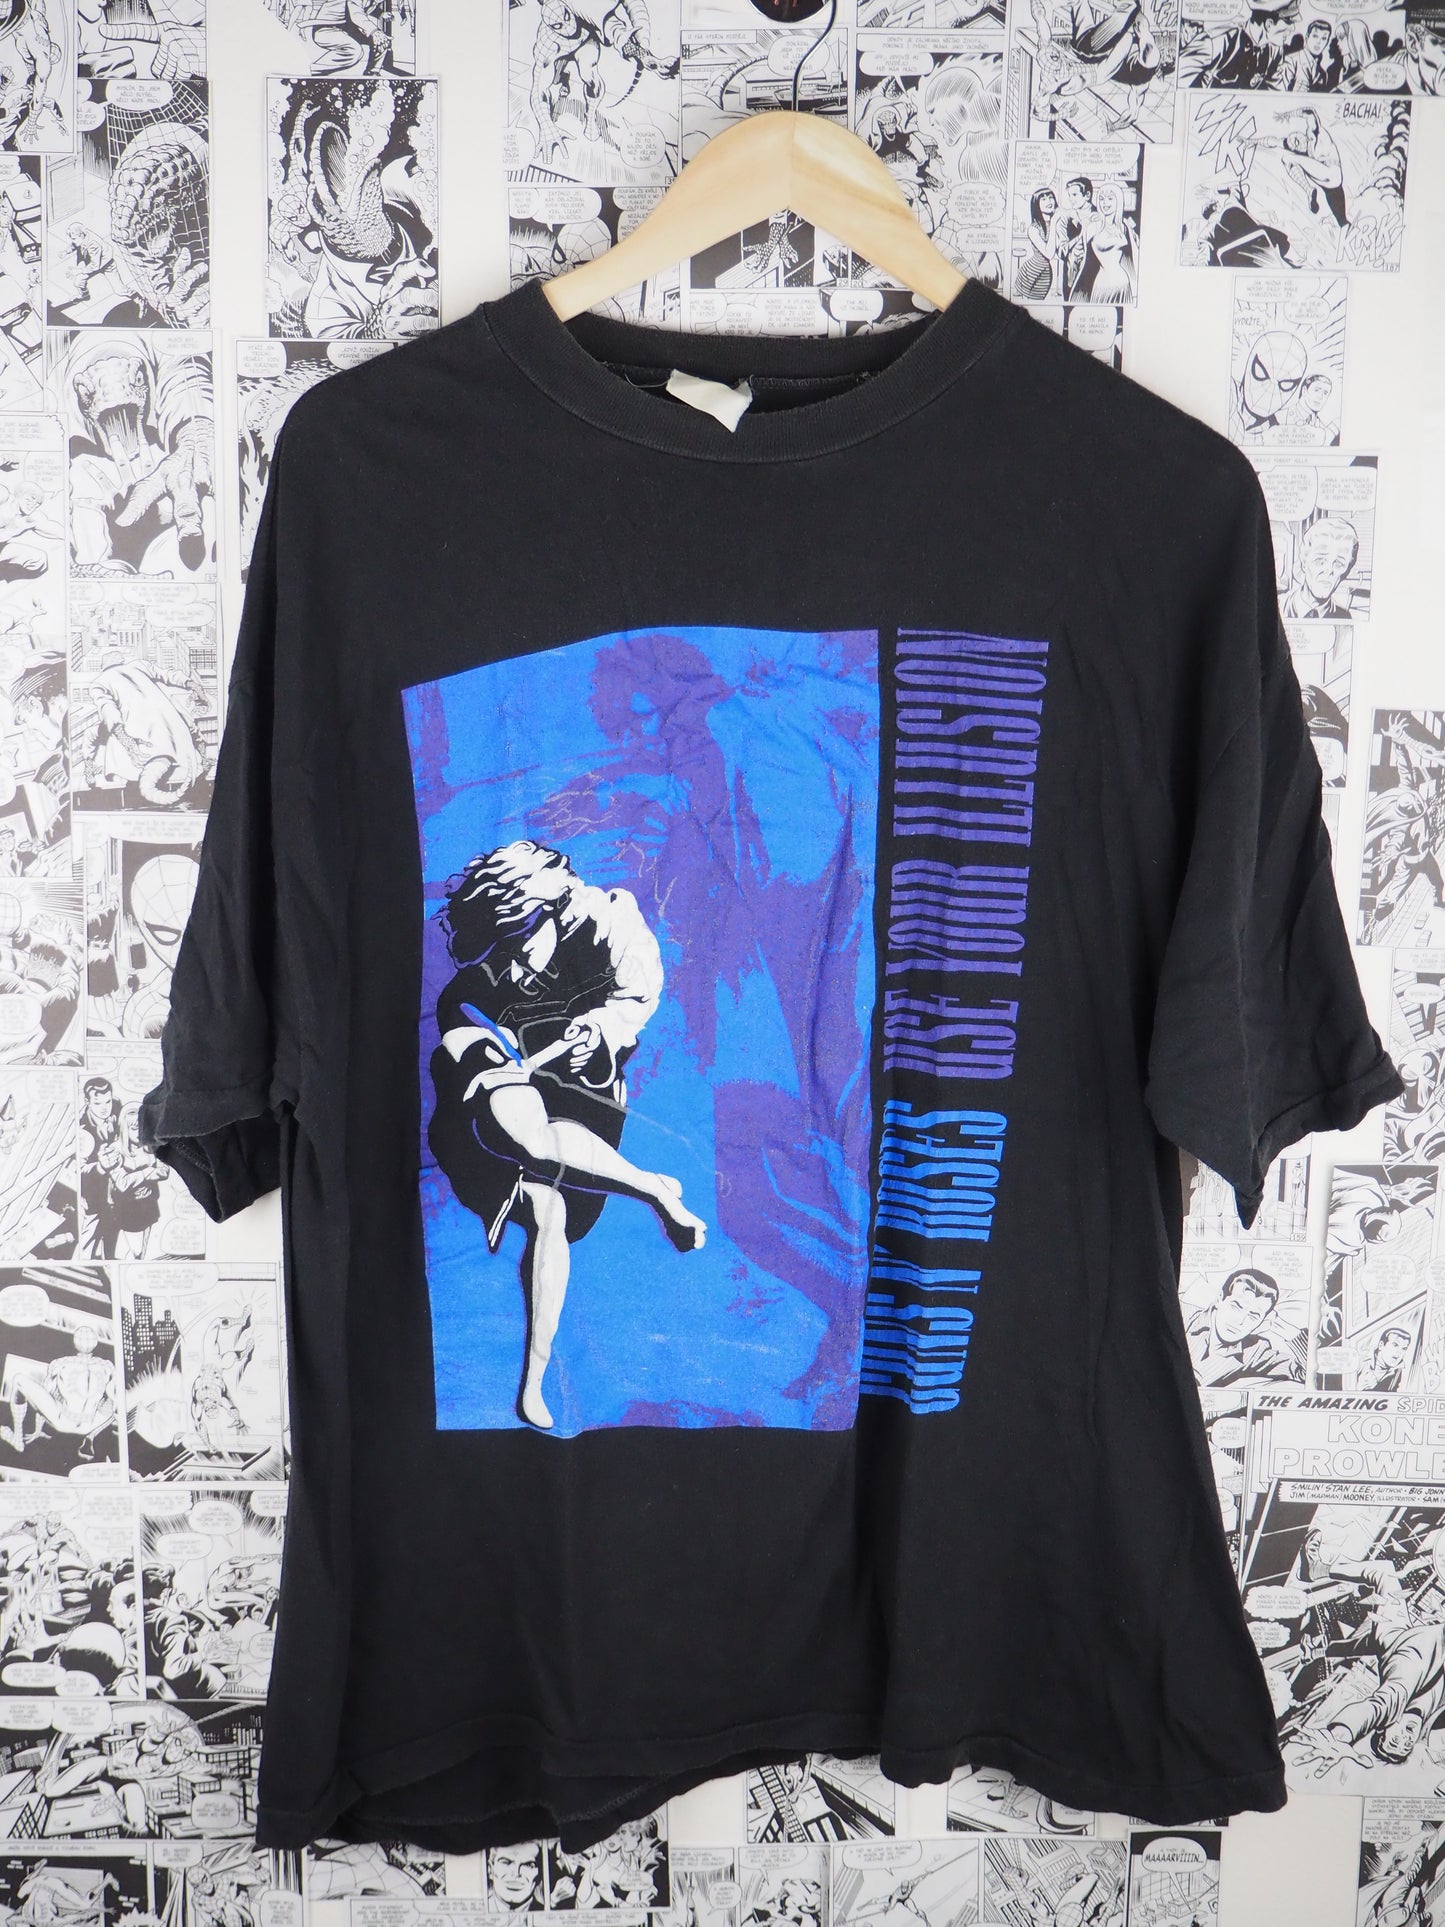 Vintage Guns N' Roses "Use Your Illusion" 90s t-shirt - size XL